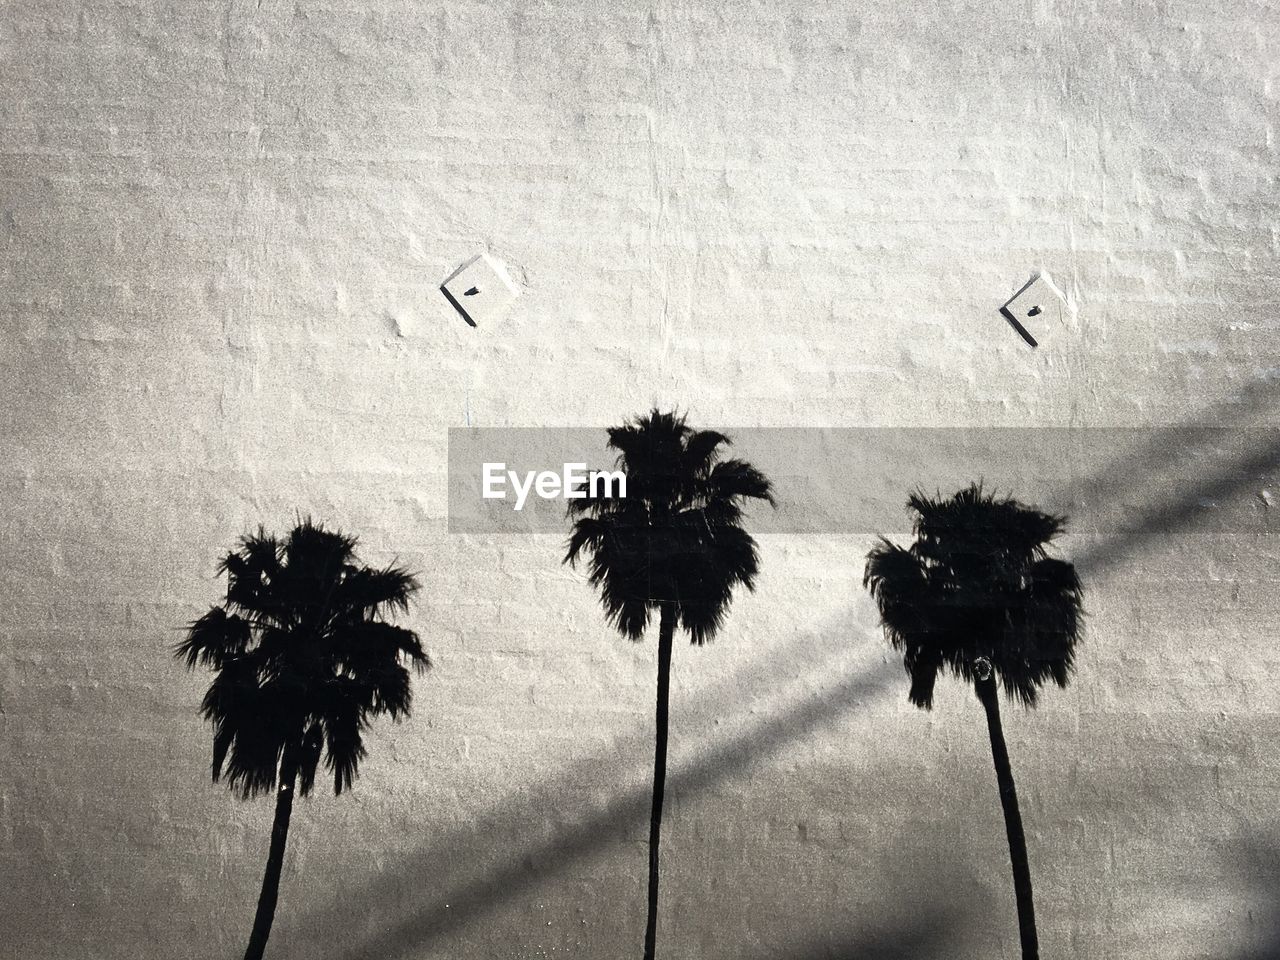 Palm tree paintings on wall